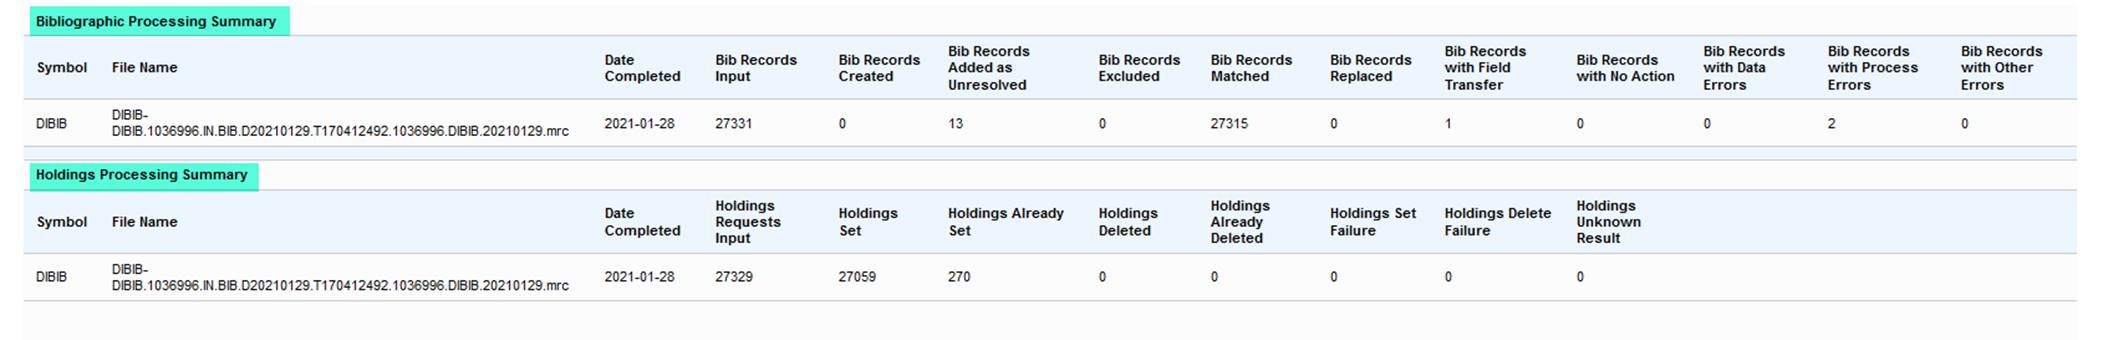 Individual Bibliographic and Holdings Processing Summary - Example